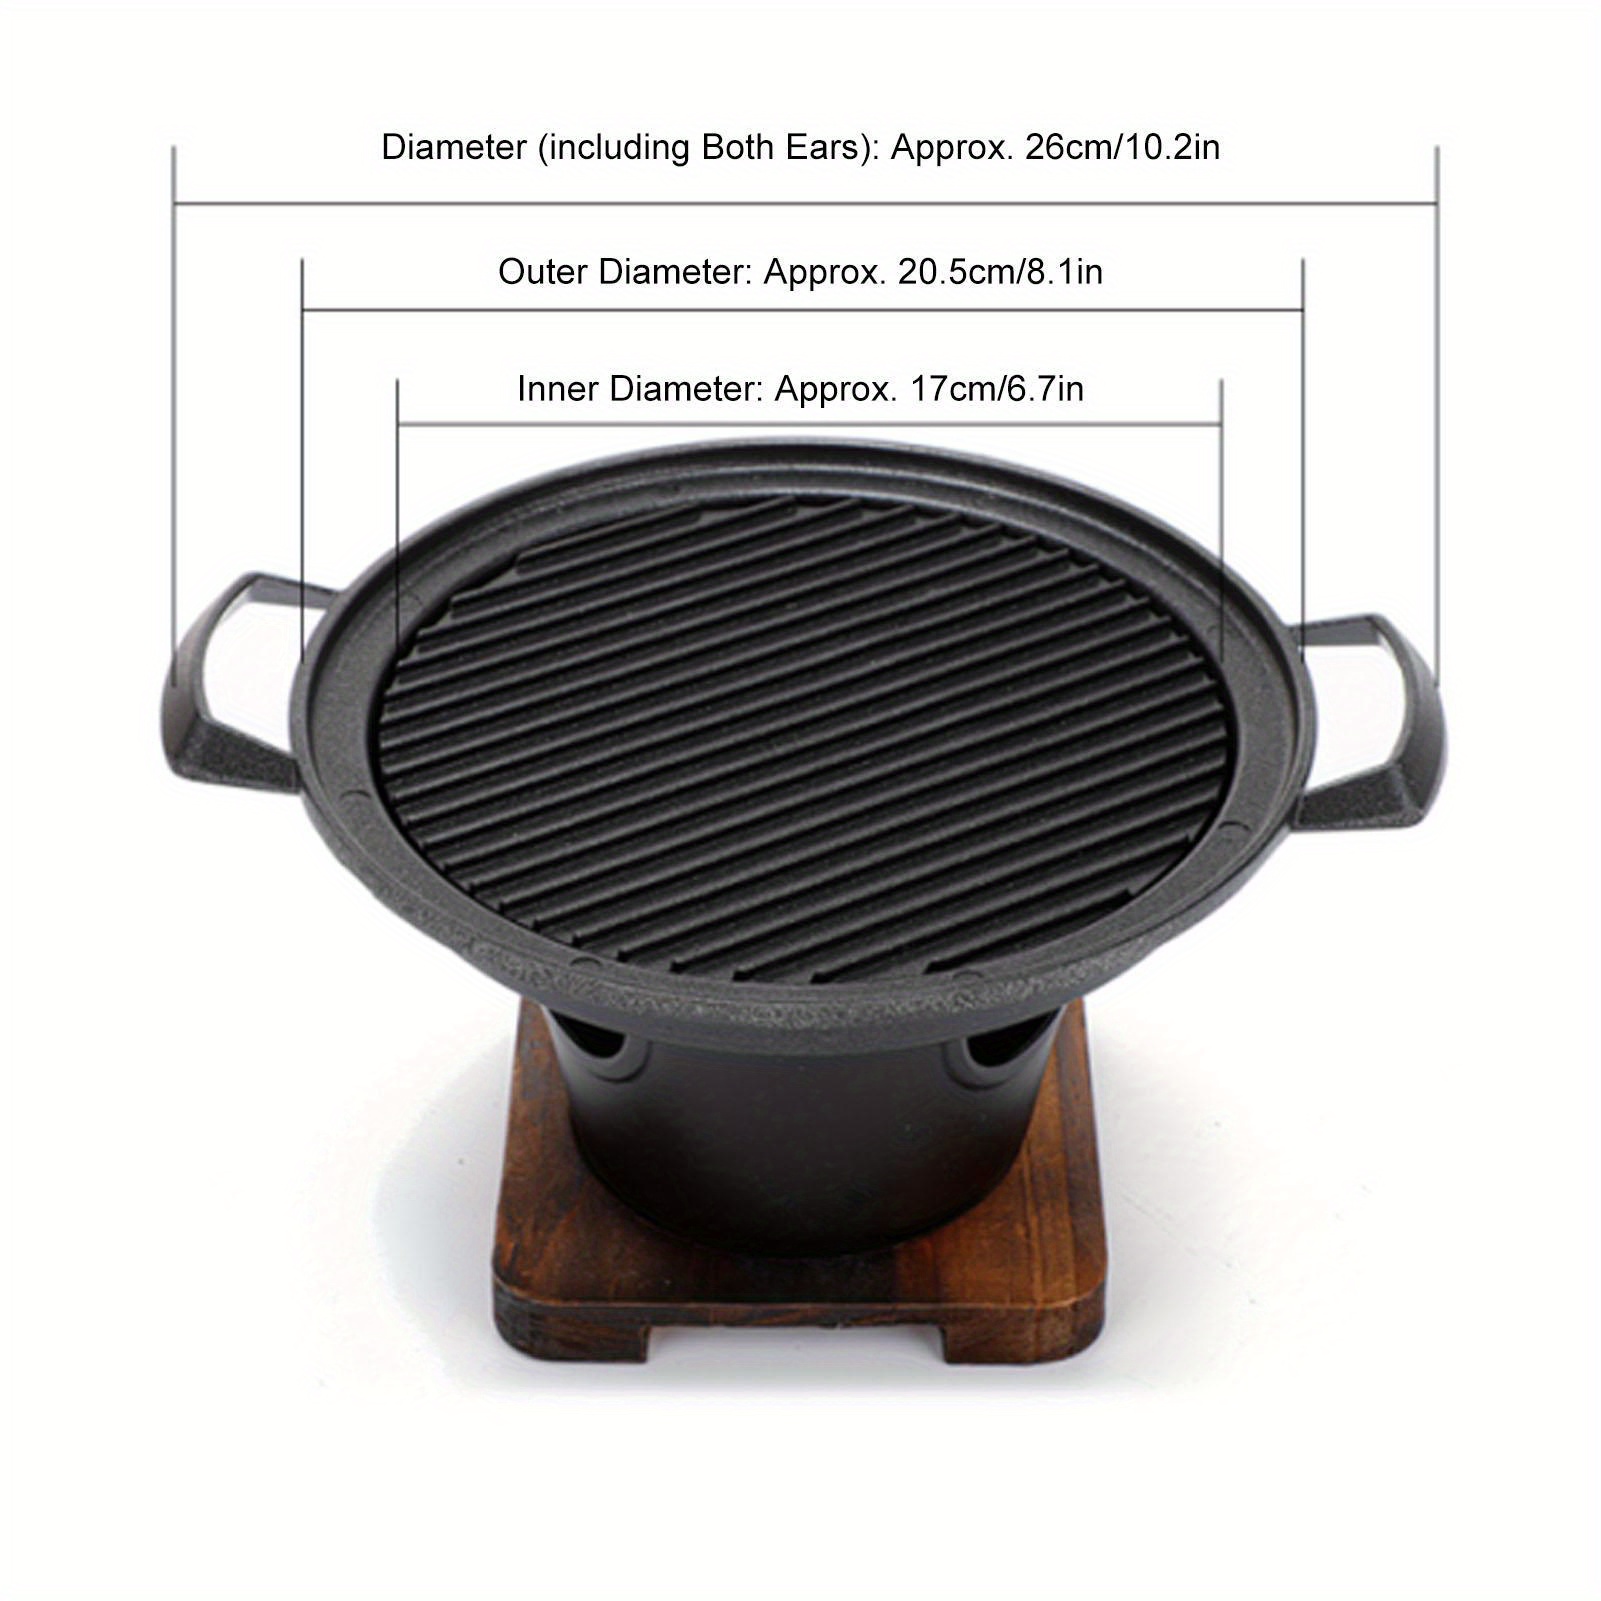 One-person Bbq Grill Indoor Small Barbecue Pot Korean Family